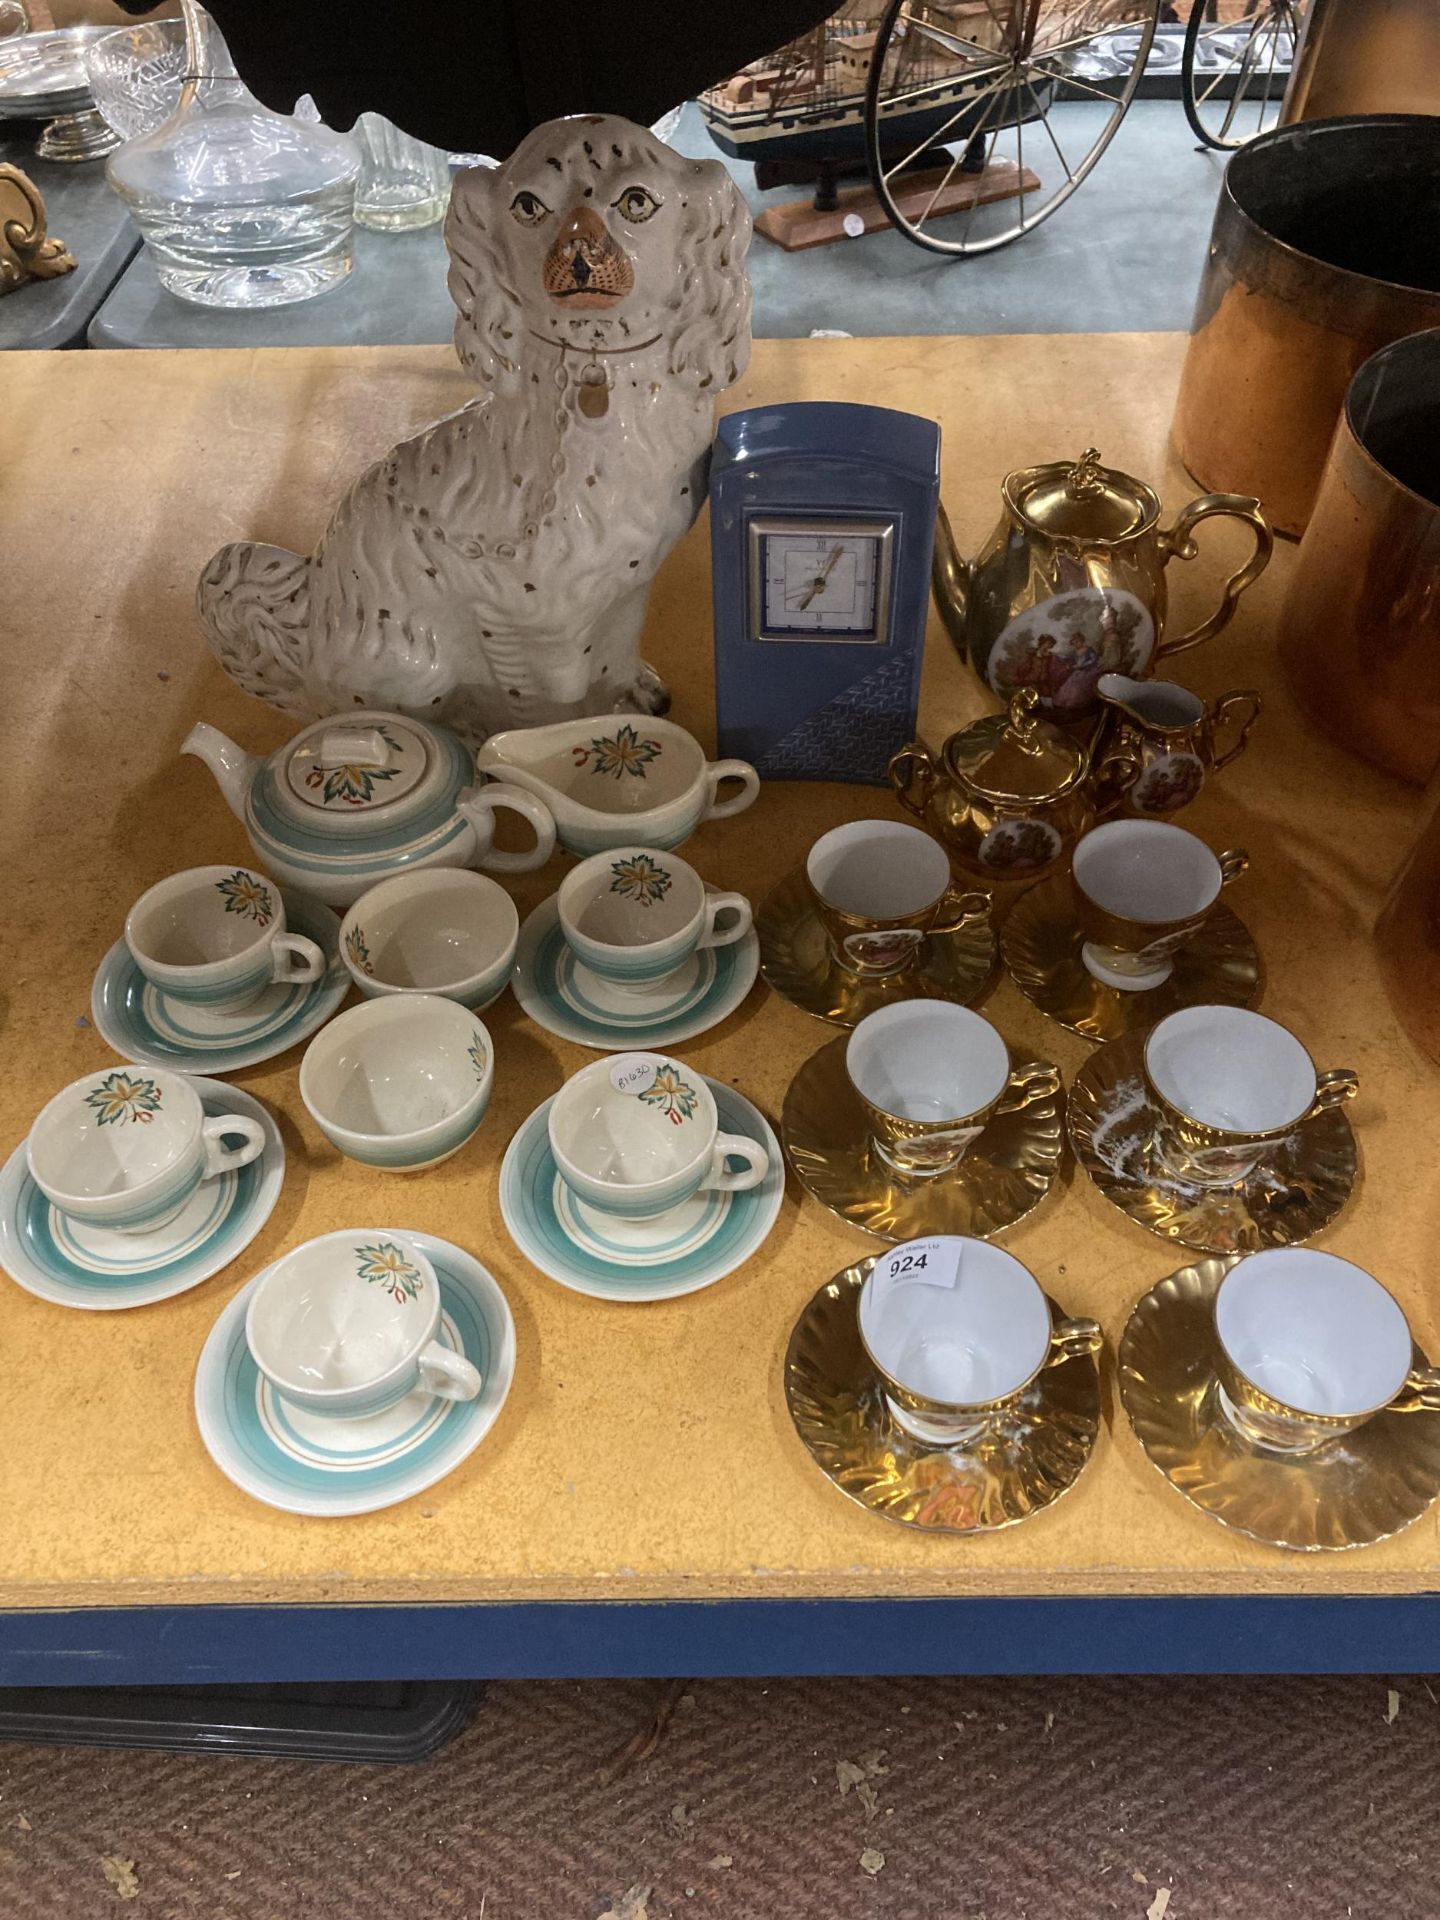 A SMALL GRINDLEY TEASET TO INCLUDE A TEAPOT, CREAM JUG, SUGAR BOWL, CUPS AND SAUCERS, A